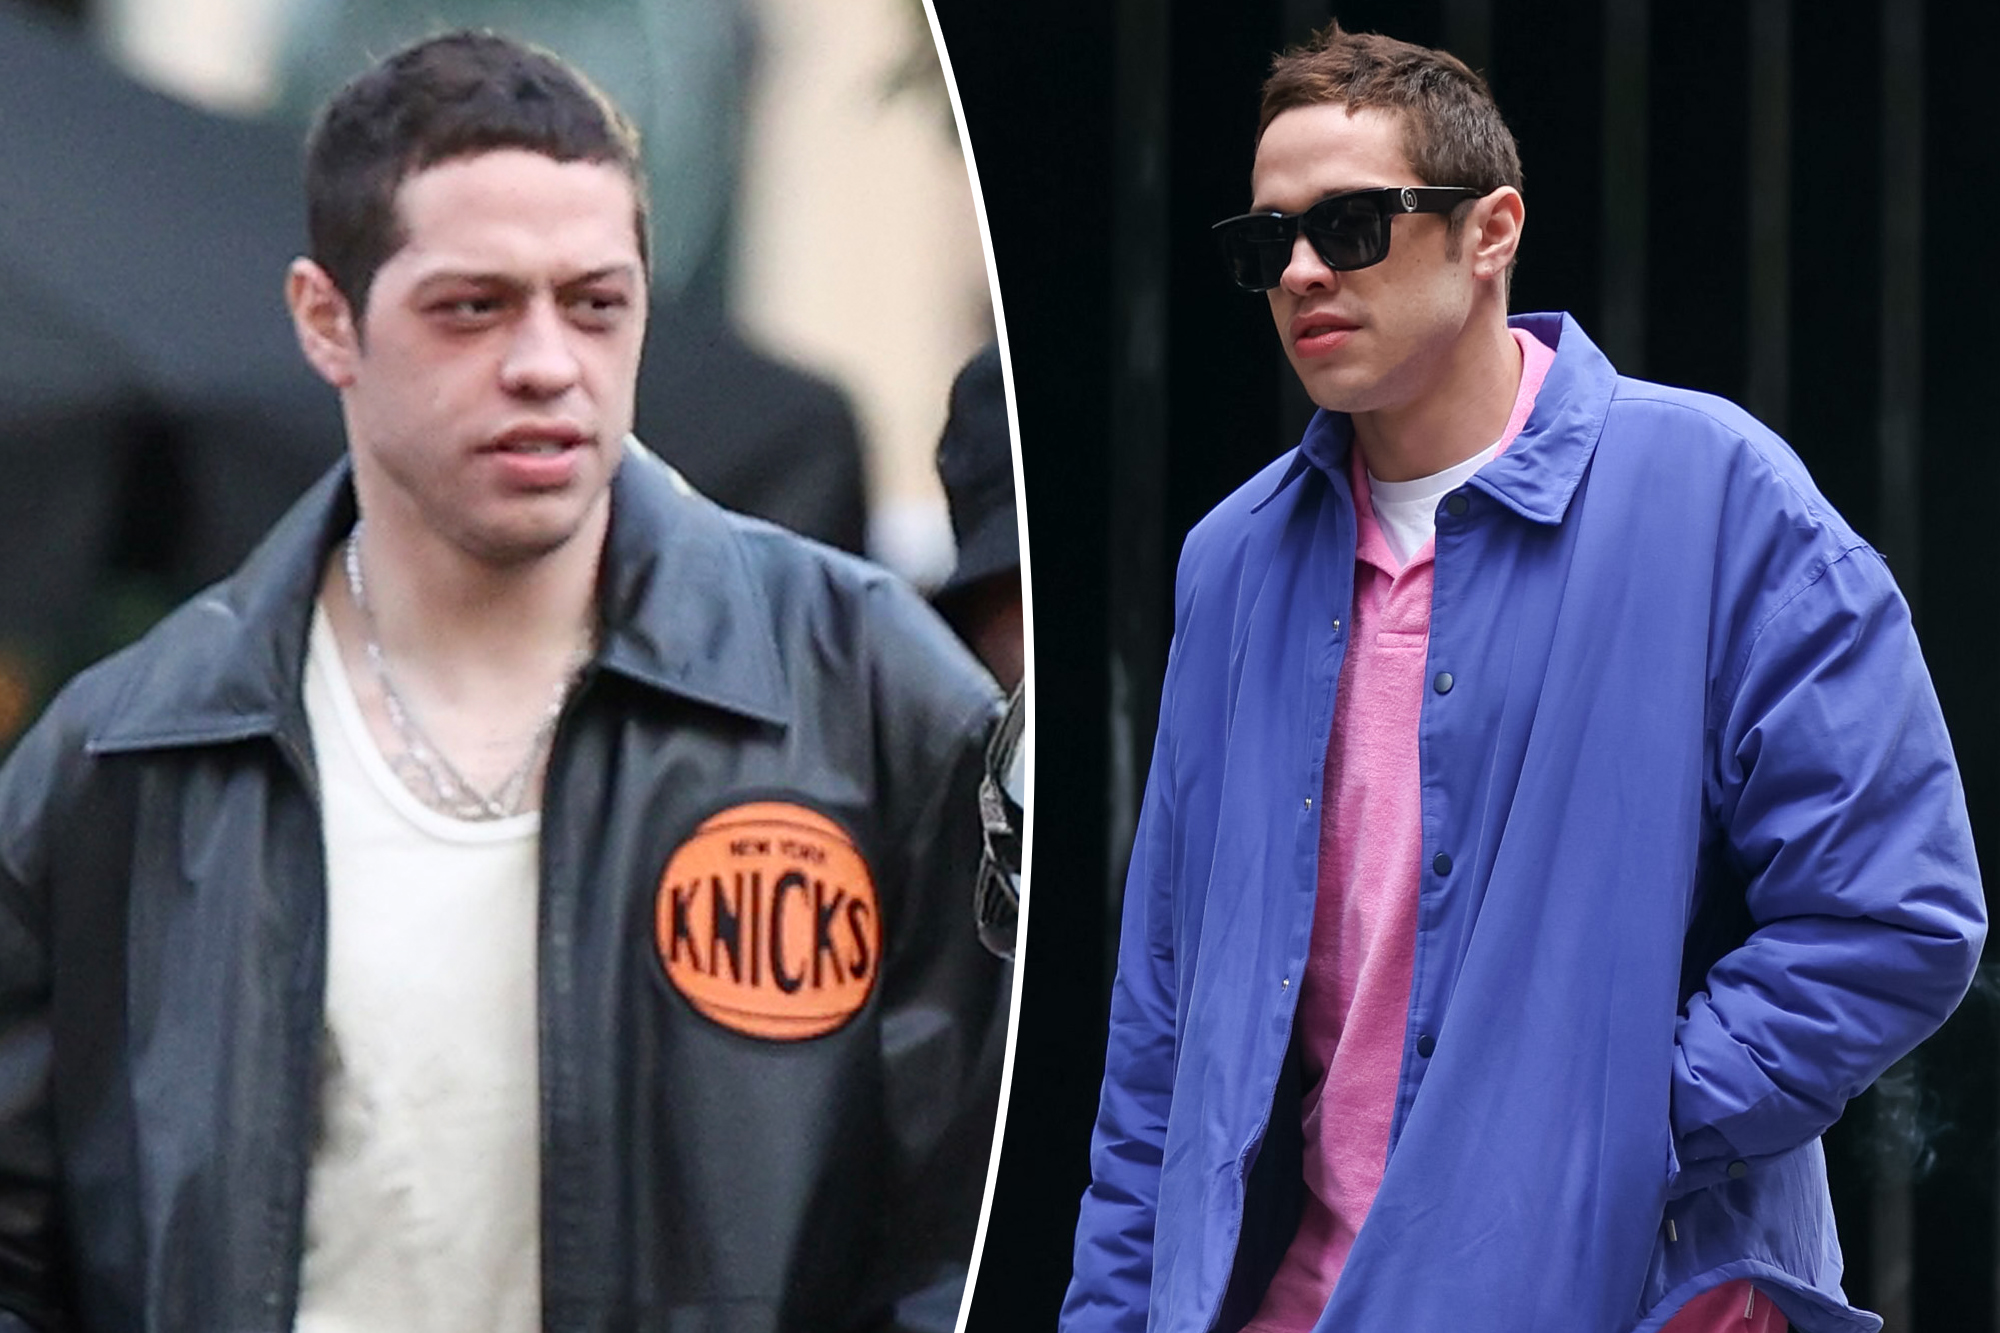 Pete Davidson's Hilarious Journey: From Coke to Cannabis - The Last Stand of Weed